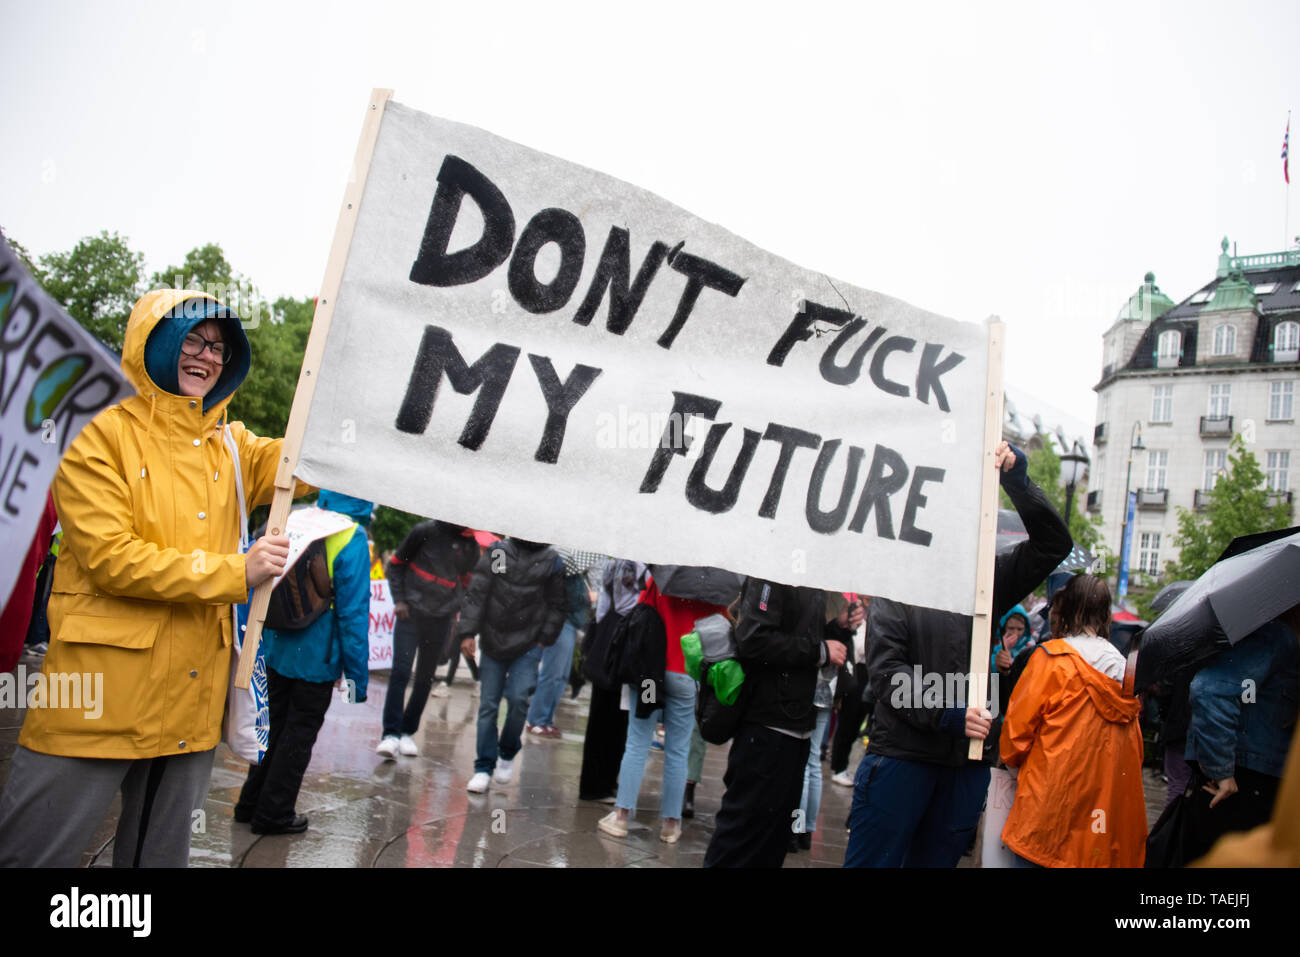 OSLO - MAY 24, 2019: Students carry a sign reading 'Don't Fuck My Future' as thousands march in the School Strike for the Climate in Oslo, Norway, May 24, 2019. Stock Photo